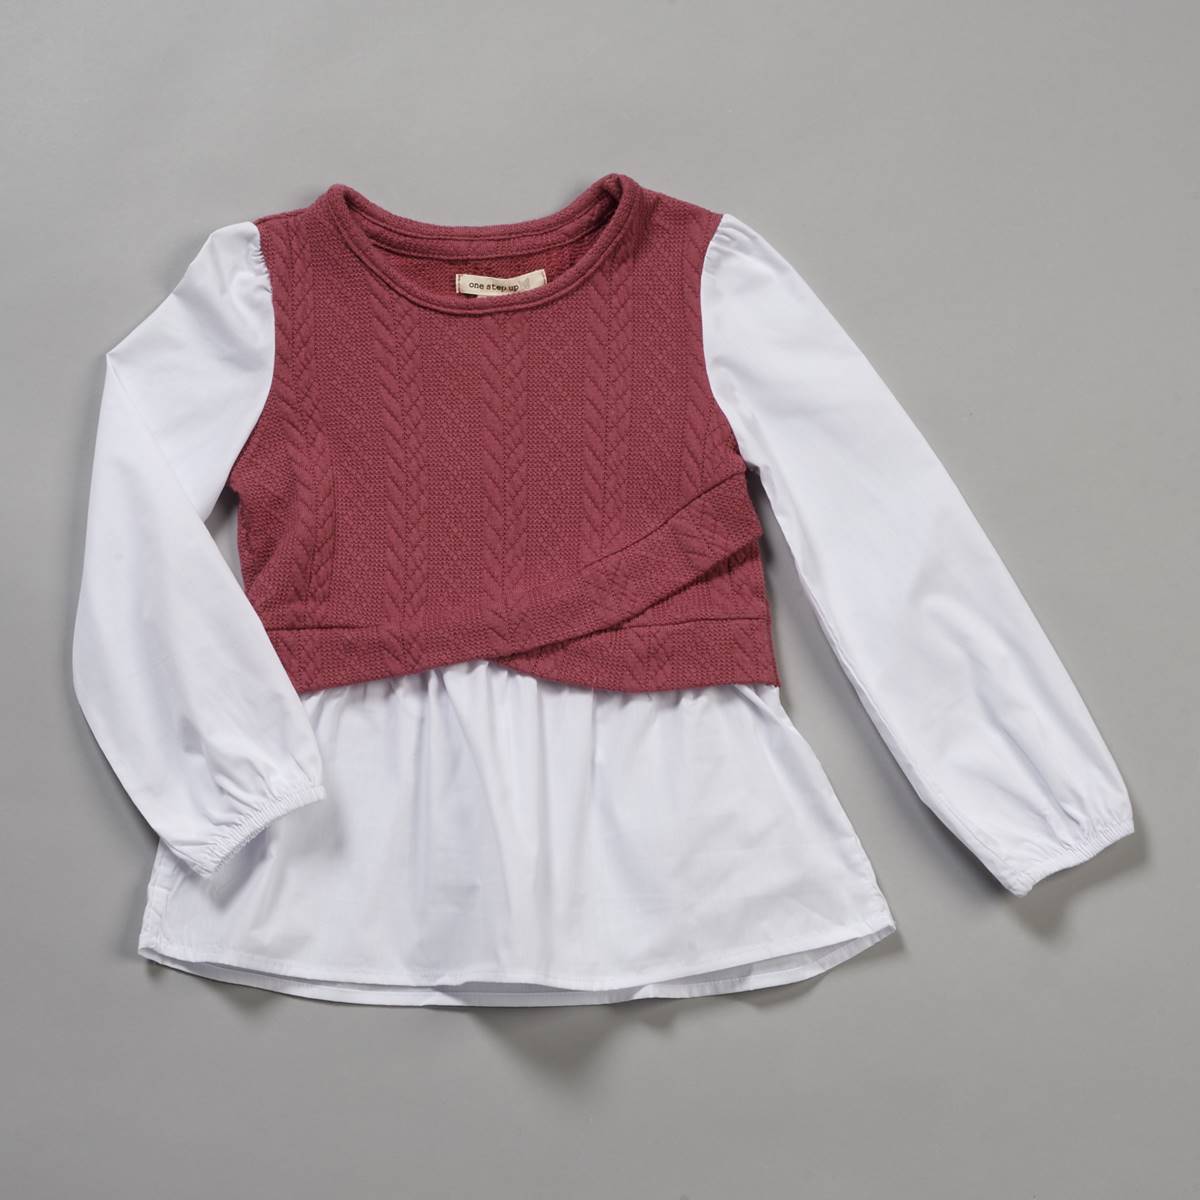 Girls (4-6x) One Step Up Textured Knit Poplin 2-in-1 Top